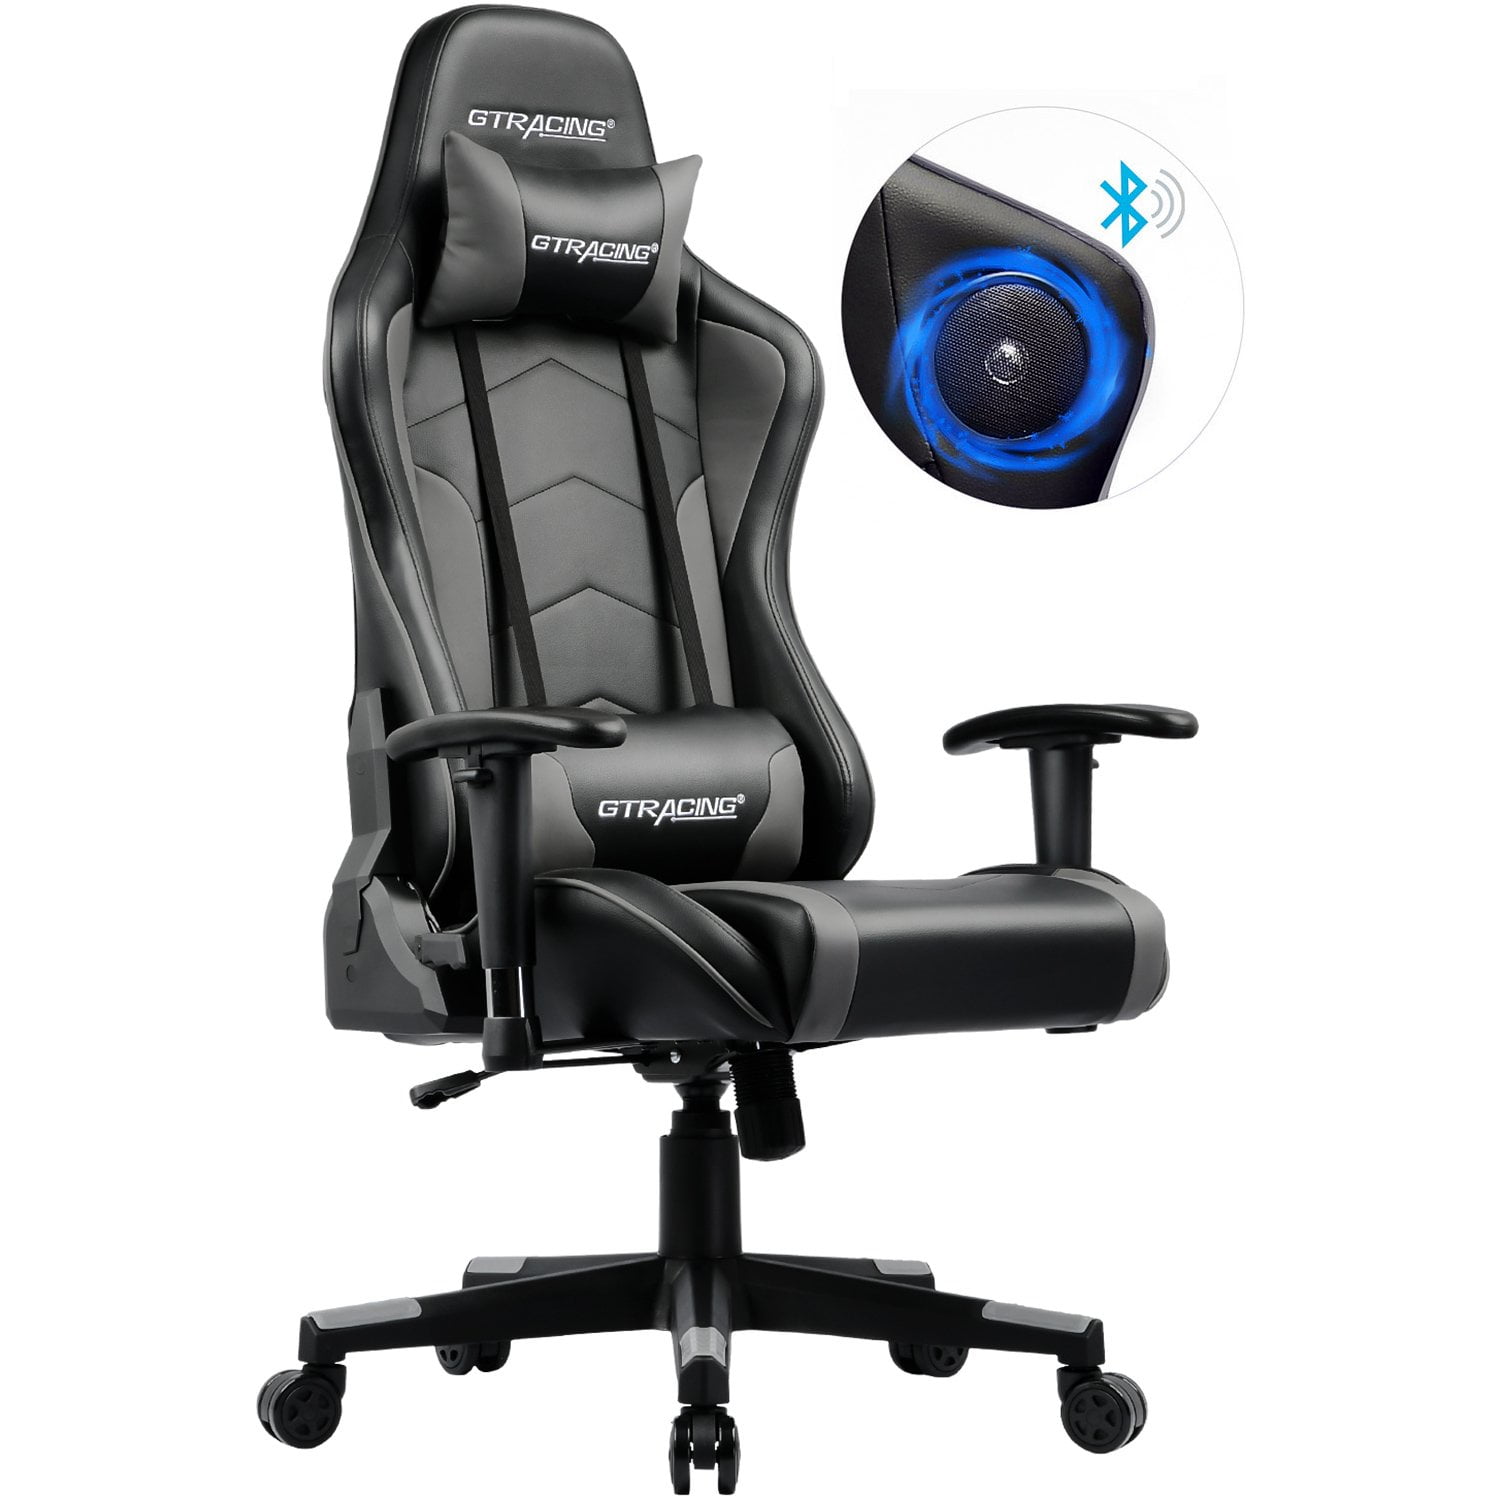 GTRACING Gaming Chair with Speakers Bluetooth in Home